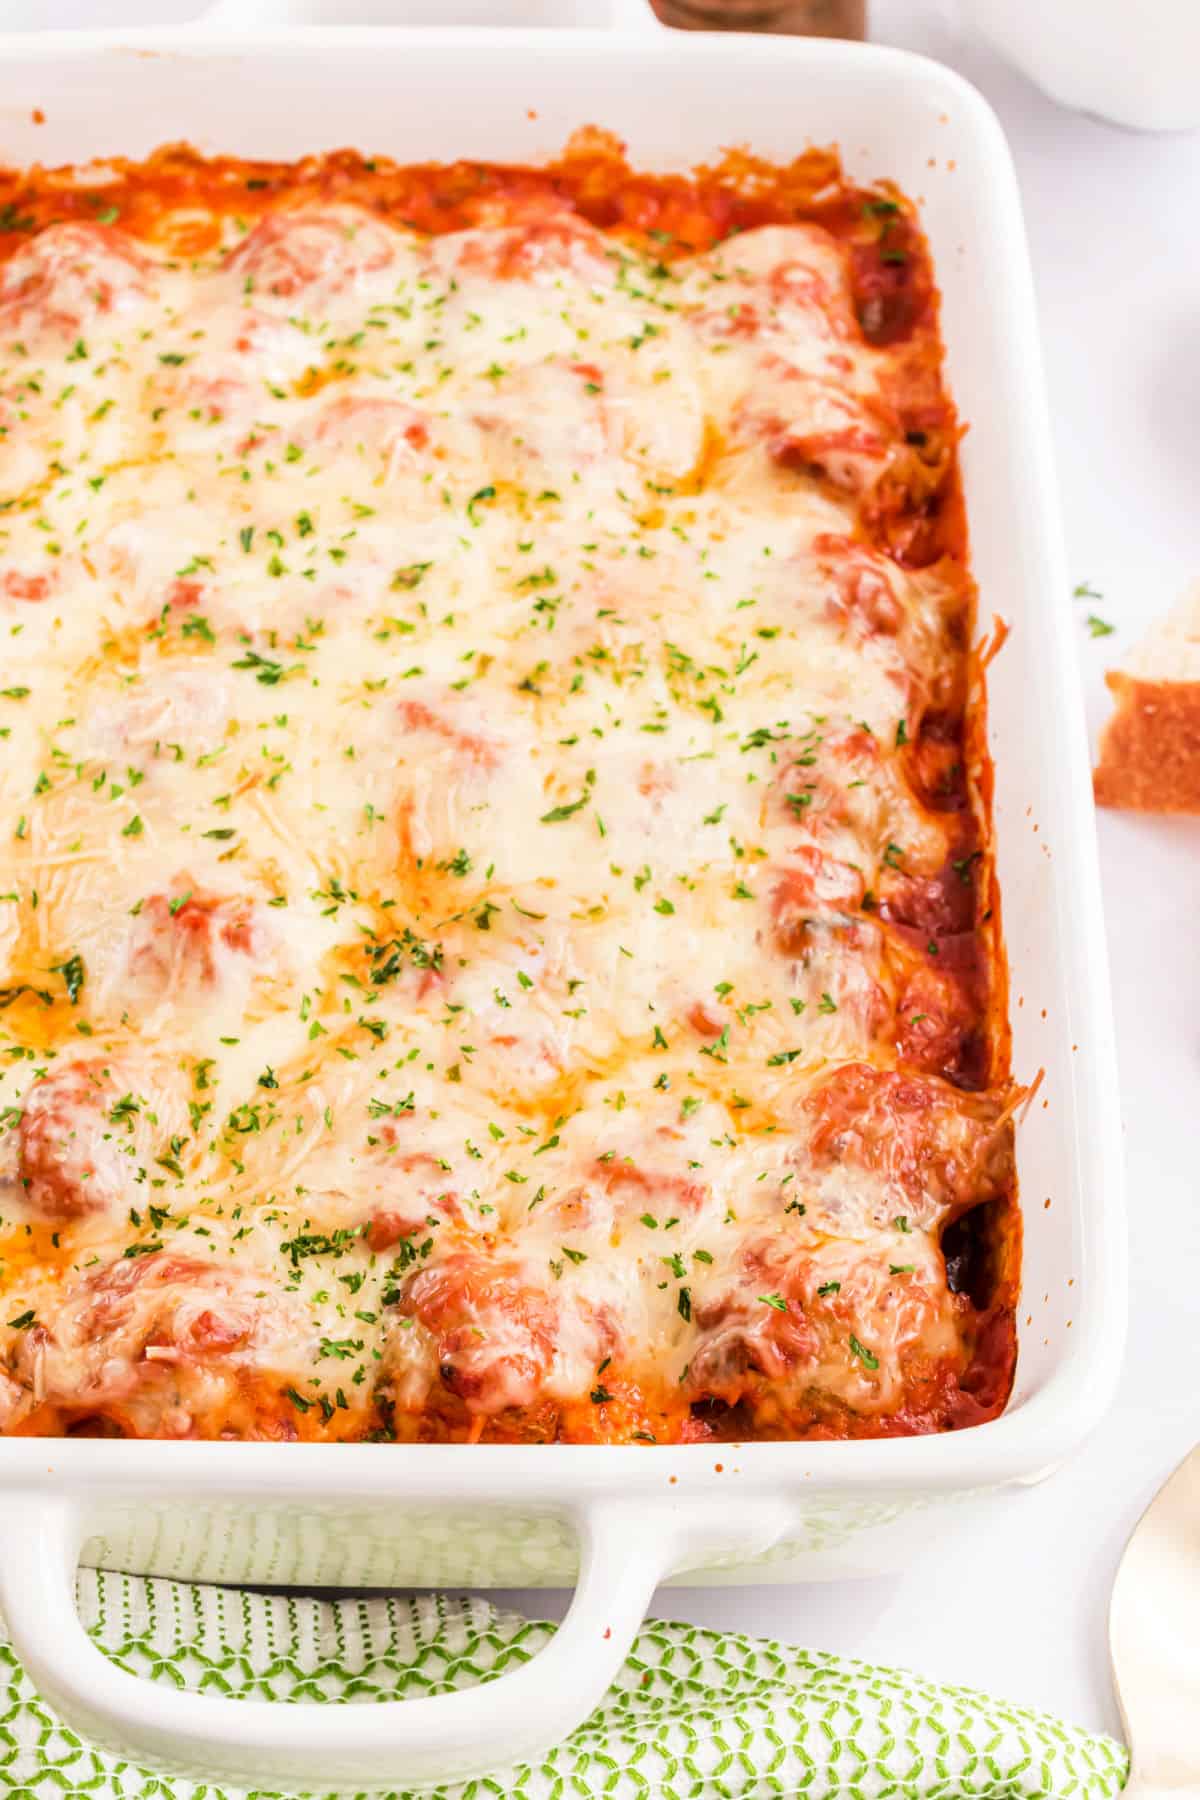 Baked meatball casserole in a white baking dish.